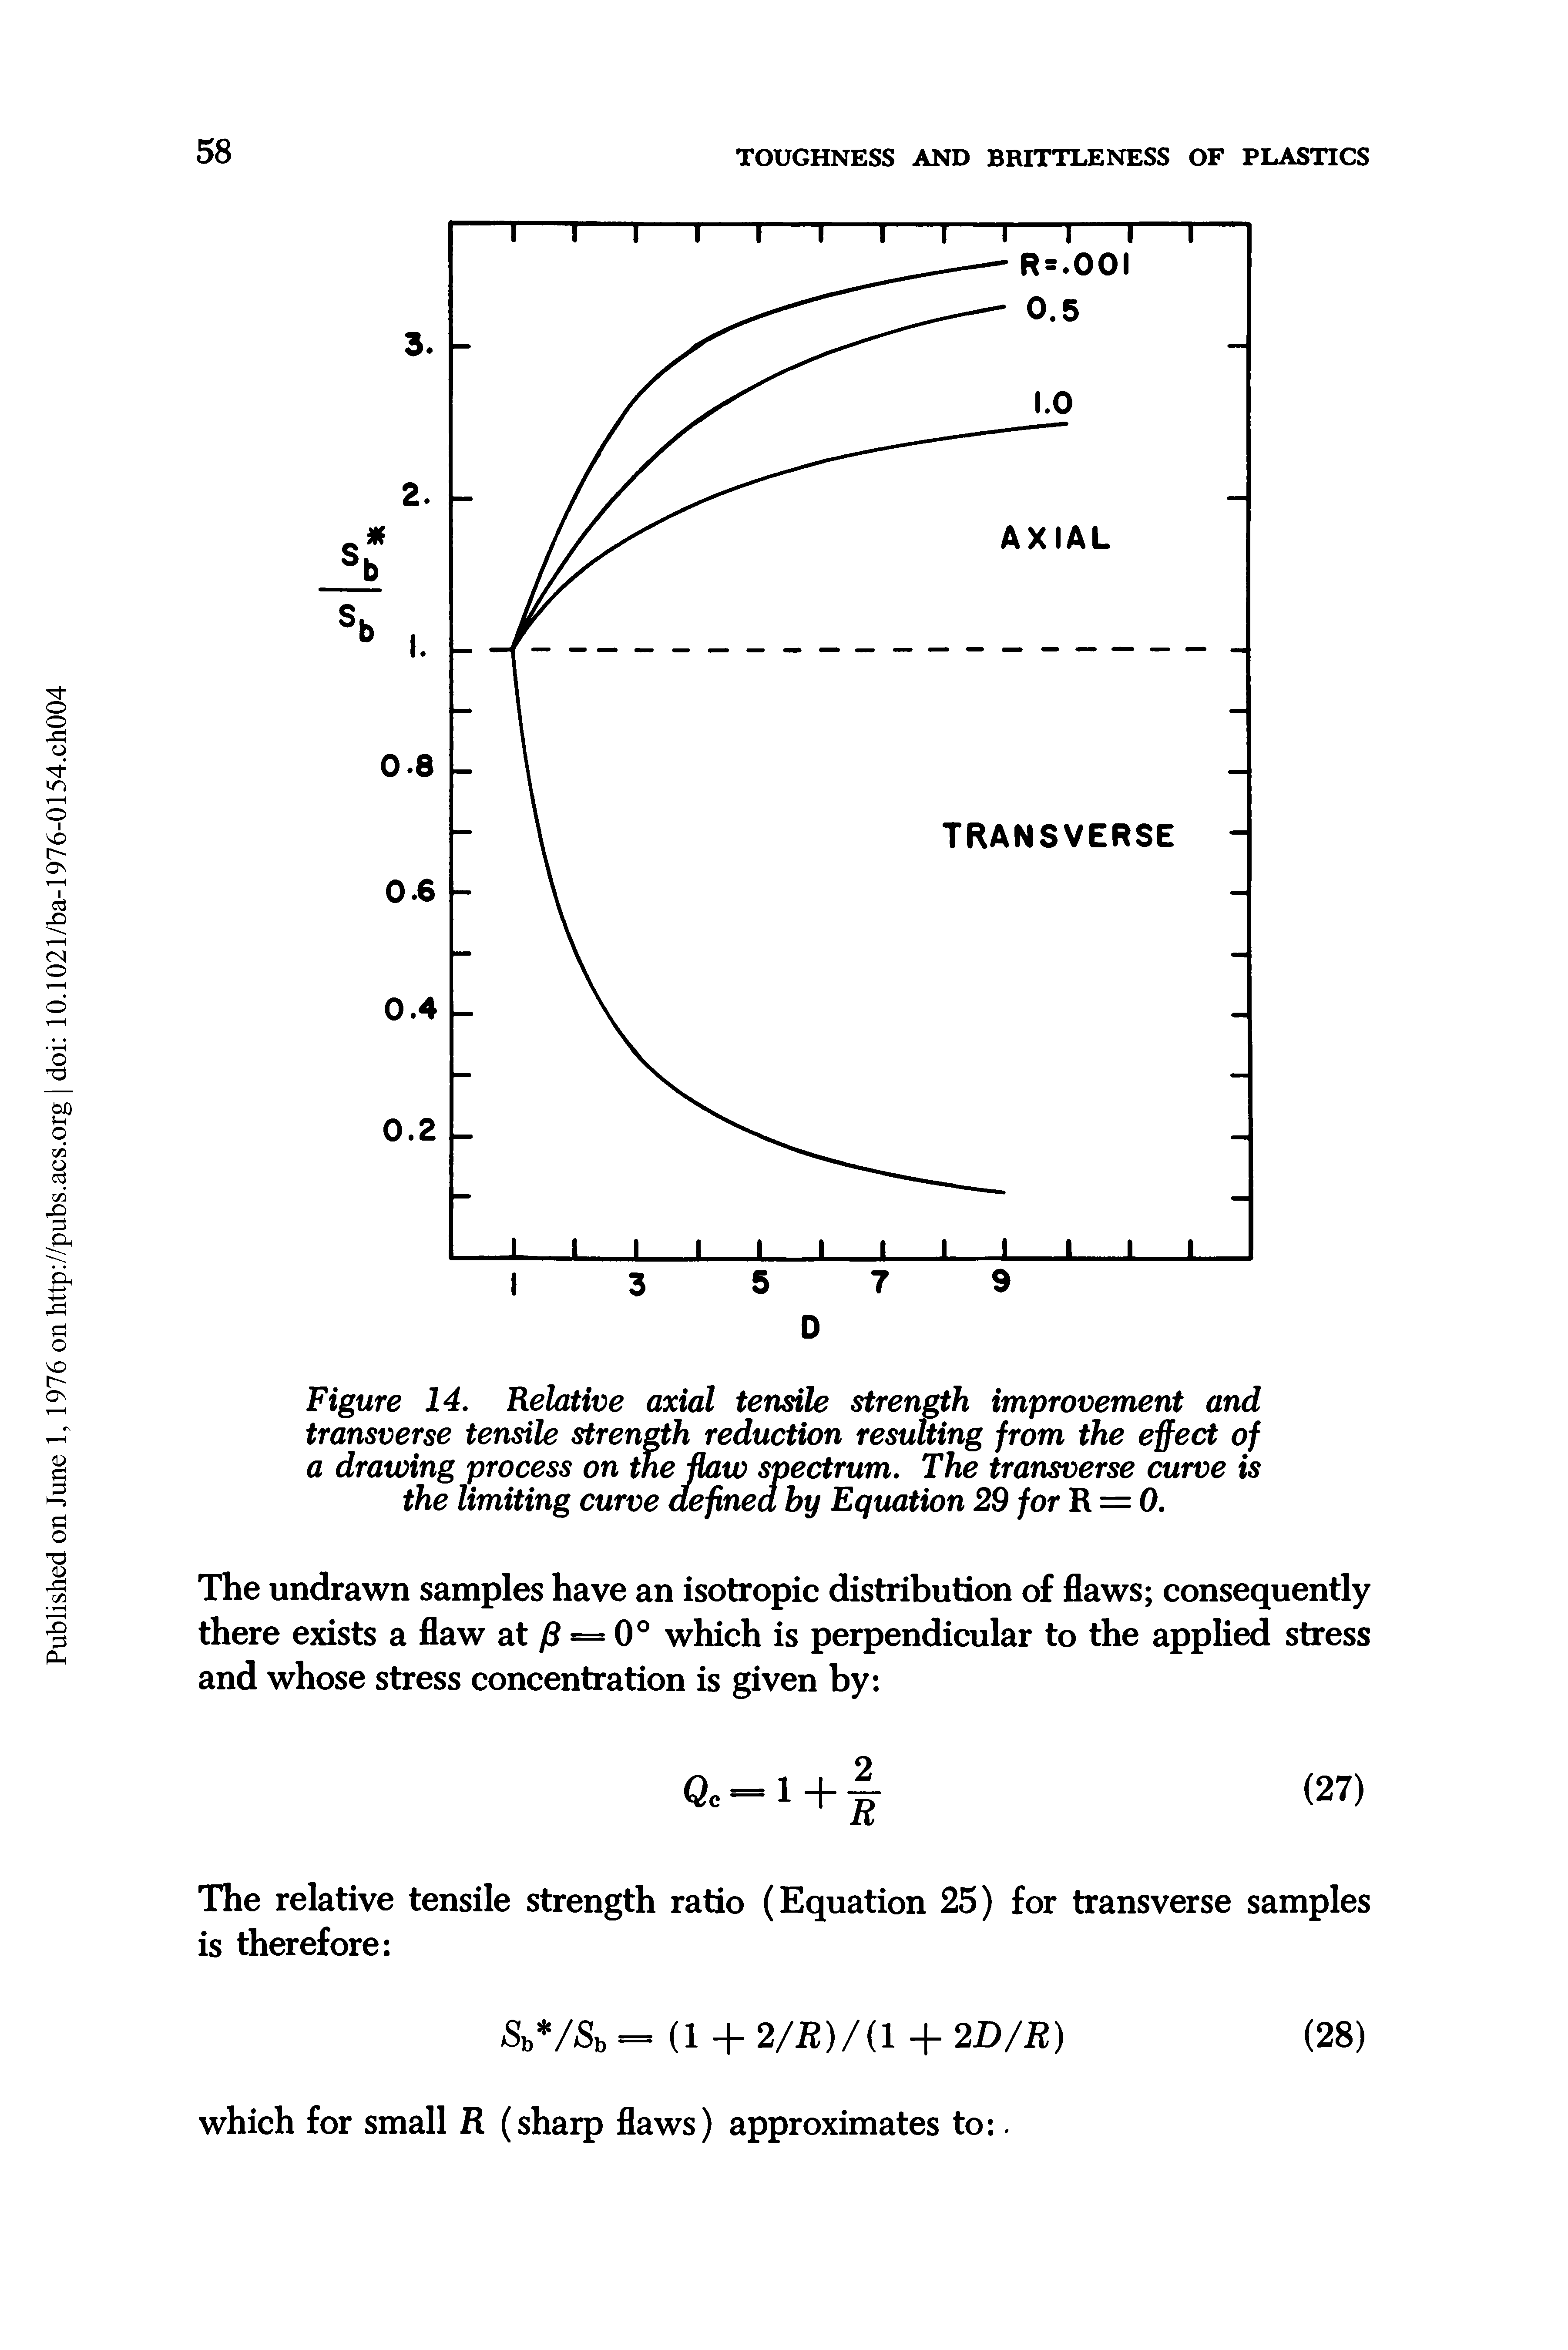 Figure 14. Relative axial tensile strength improvement and transverse tensile strength reduction resulting from the effect of a drawing process on the flaw spectrum. The transverse curve is the limiting curve defined by Equation 29 for R = 0.